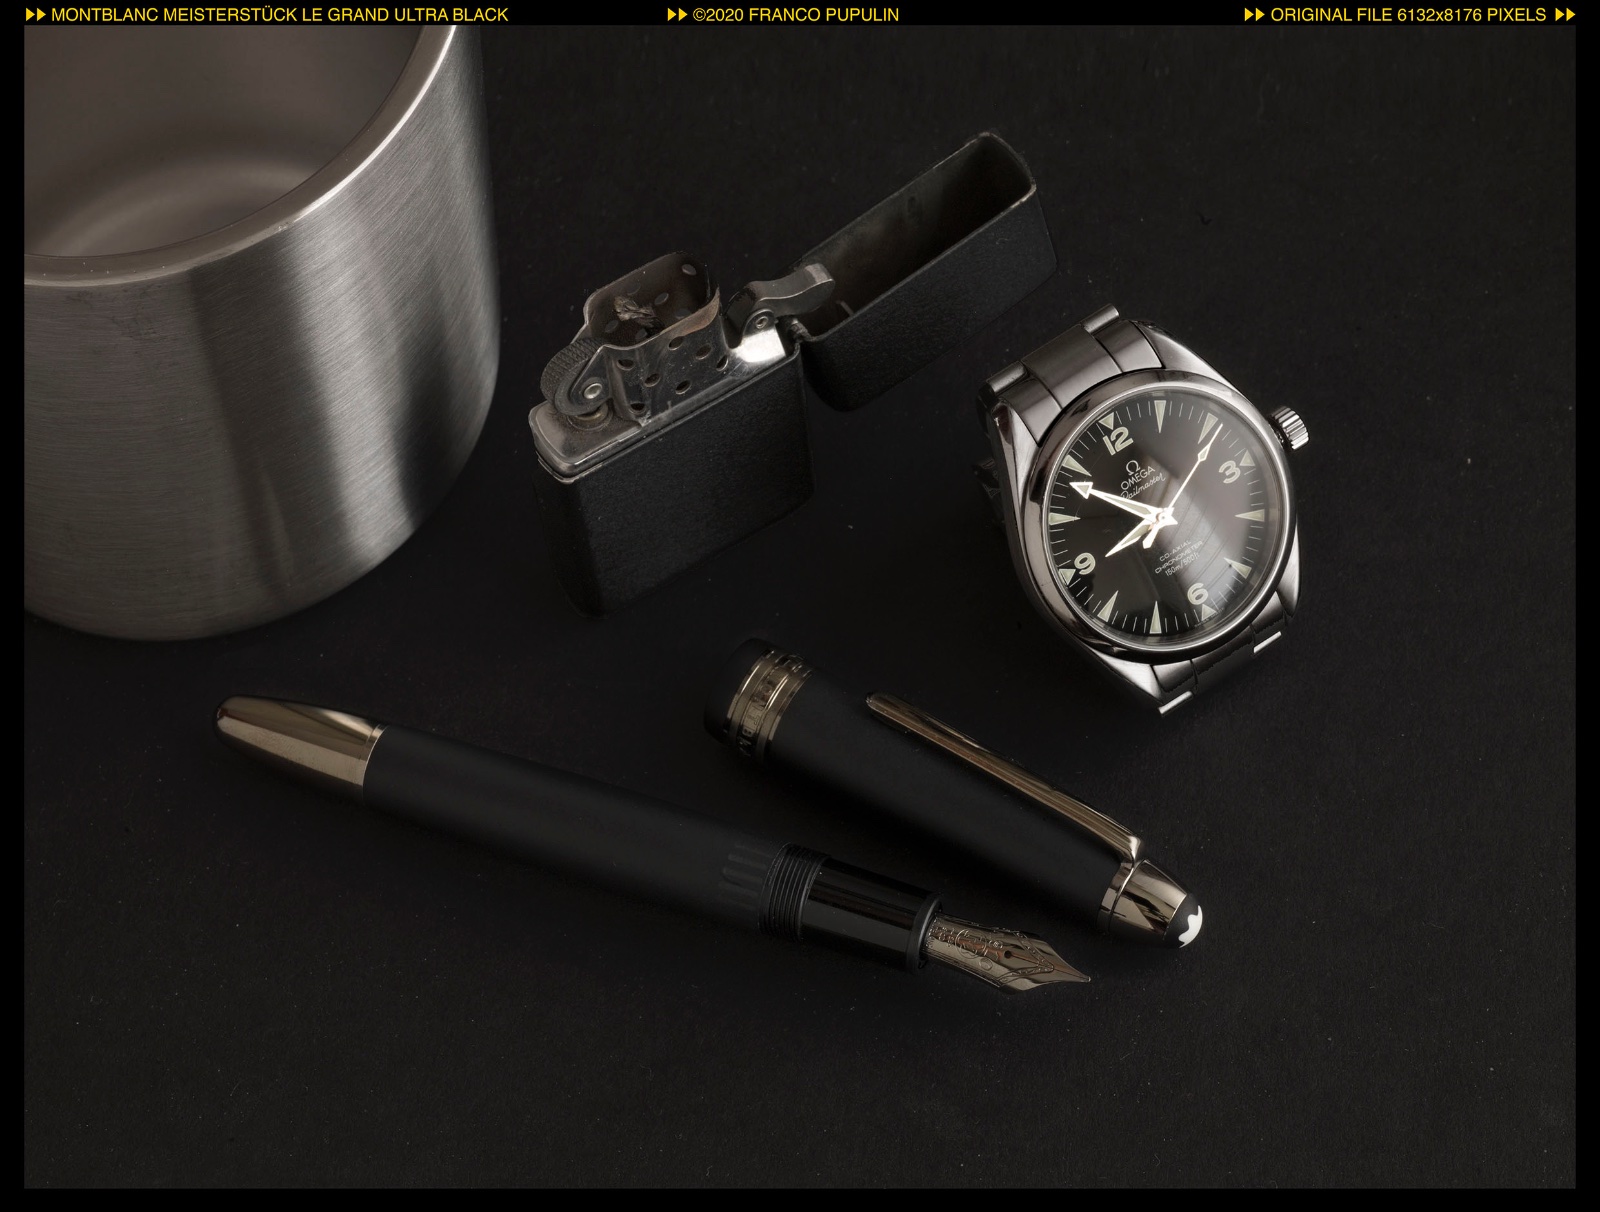 An extended comment on the Meisterstück Ultra Black   Montblanc